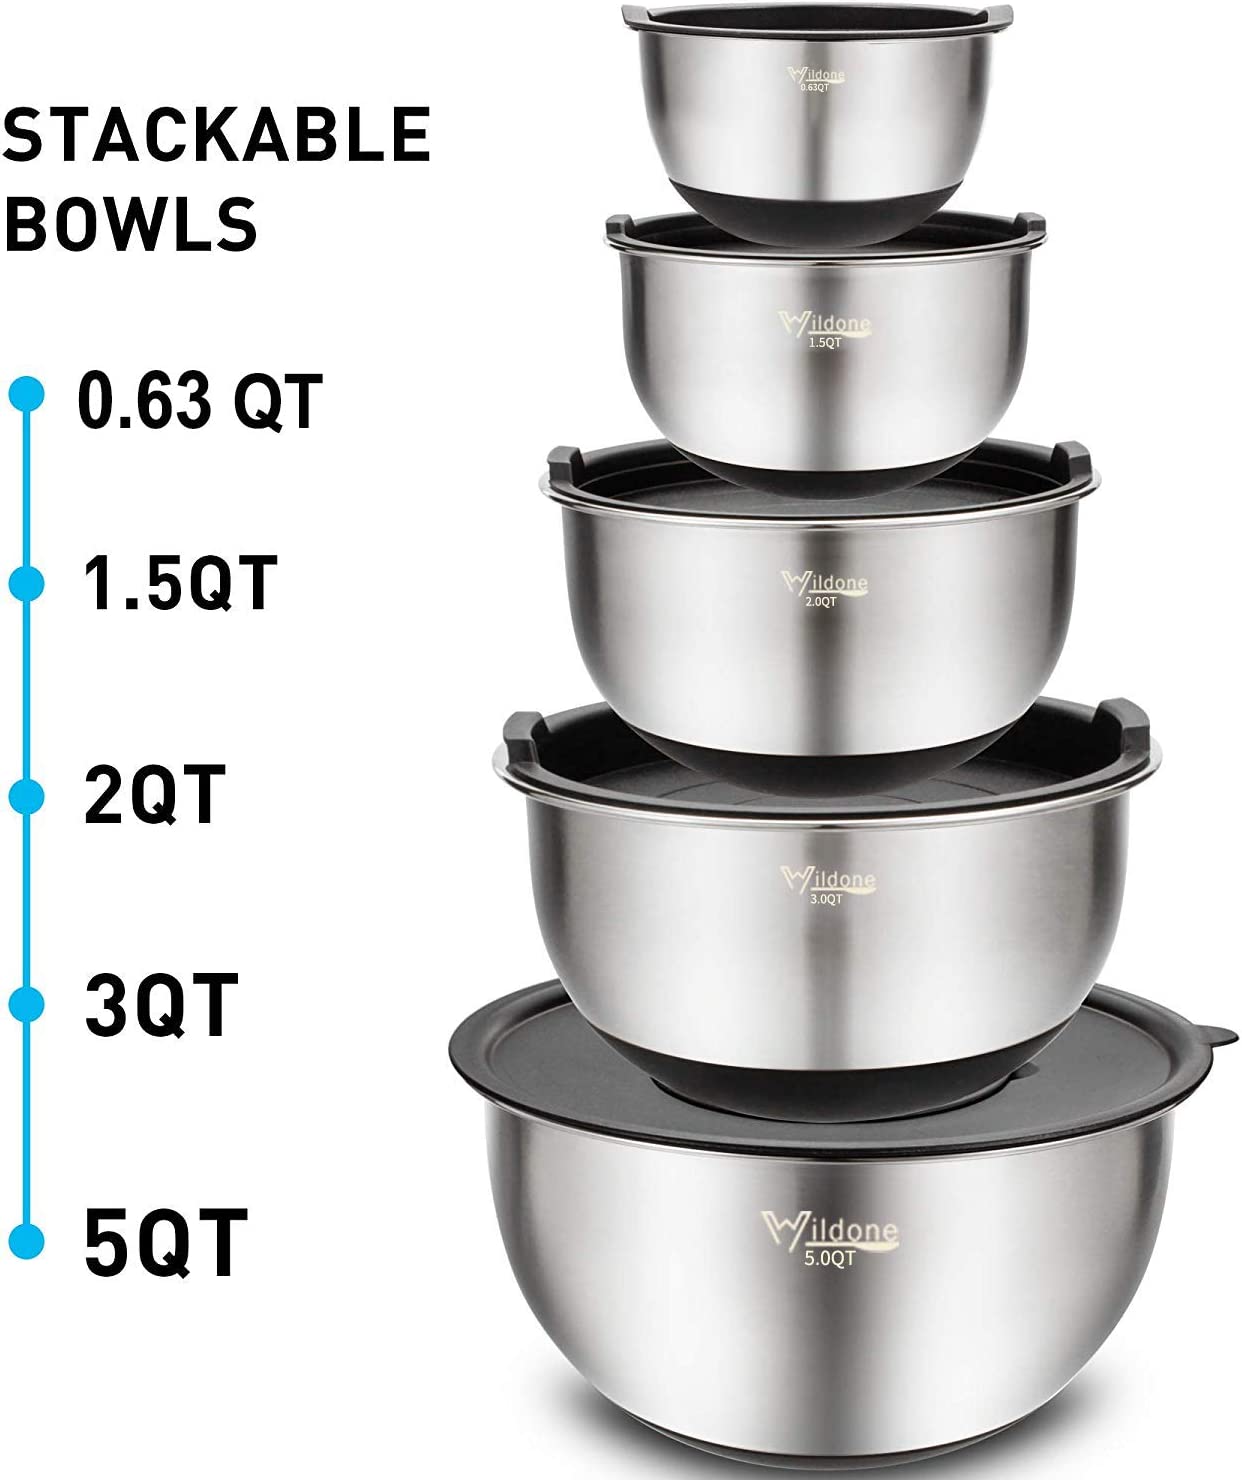 Stainless Steel Nesting Bowls with Airtight Lids & Measurement Marks